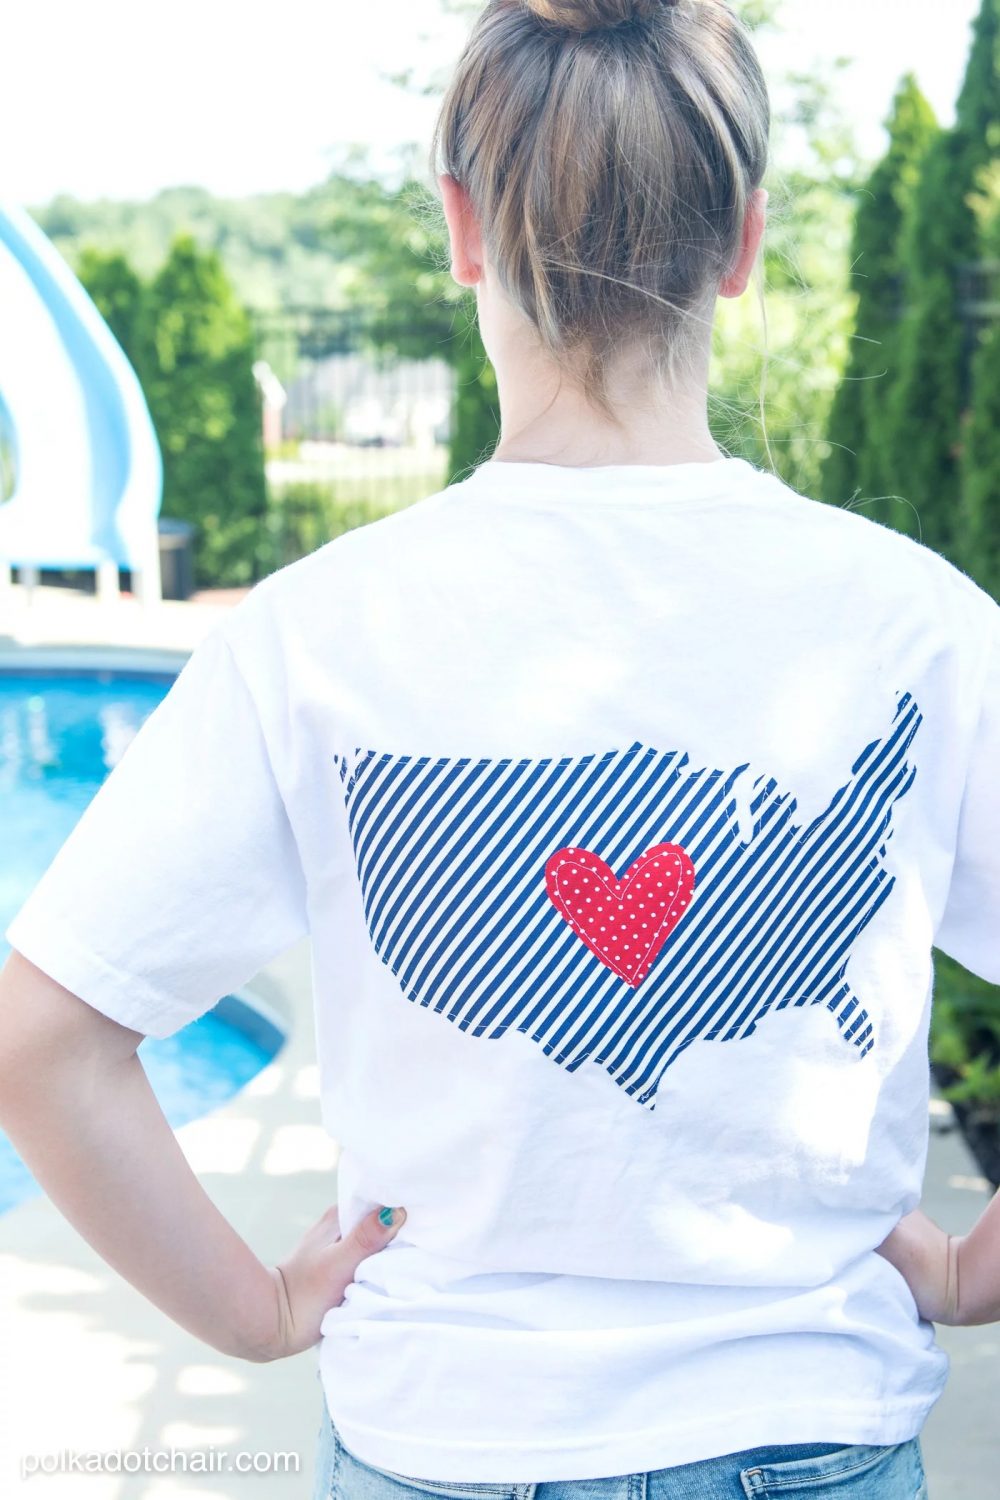 A person wearing a white shirt with an image on the back of the shirt of the USA outline and a red heart in the middle